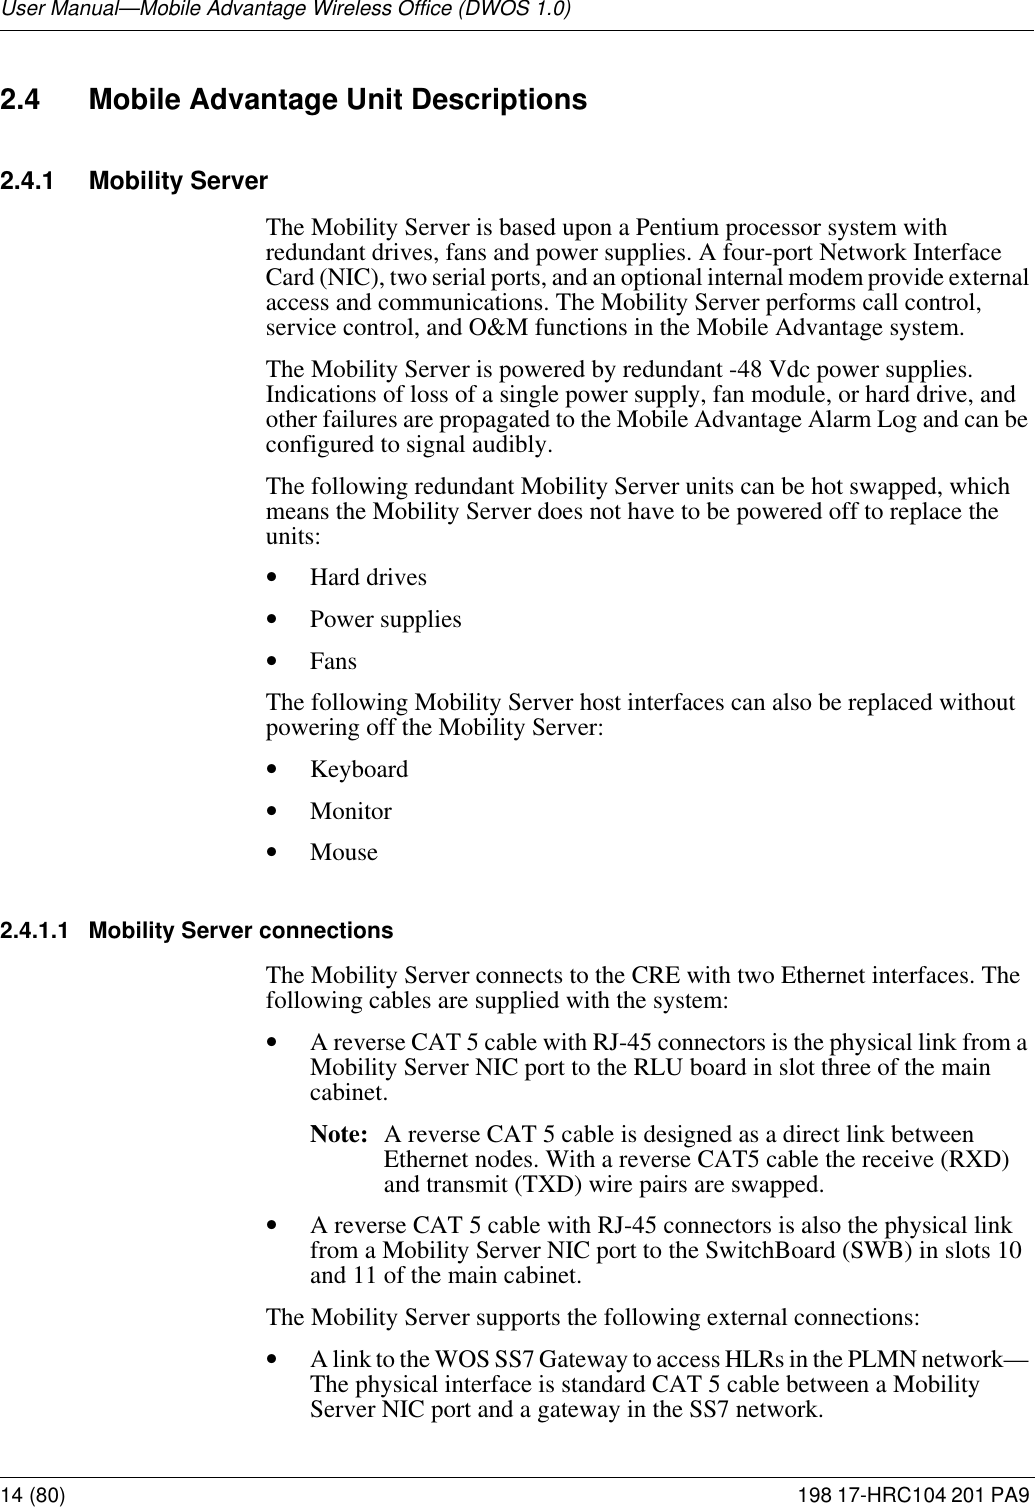 User Manual—Mobile Advantage Wireless Office (DWOS 1.0)14 (80) 198 17-HRC104 201 PA9 2.4 Mobile Advantage Unit Descriptions2.4.1 Mobility ServerThe Mobility Server is based upon a Pentium processor system with redundant drives, fans and power supplies. A four-port Network Interface Card (NIC), two serial ports, and an optional internal modem provide external access and communications. The Mobility Server performs call control, service control, and O&amp;M functions in the Mobile Advantage system. The Mobility Server is powered by redundant -48 Vdc power supplies. Indications of loss of a single power supply, fan module, or hard drive, and other failures are propagated to the Mobile Advantage Alarm Log and can be configured to signal audibly. The following redundant Mobility Server units can be hot swapped, which means the Mobility Server does not have to be powered off to replace the units:•Hard drives•Power supplies•FansThe following Mobility Server host interfaces can also be replaced without powering off the Mobility Server:•Keyboard•Monitor•Mouse2.4.1.1 Mobility Server connectionsThe Mobility Server connects to the CRE with two Ethernet interfaces. The following cables are supplied with the system: •A reverse CAT 5 cable with RJ-45 connectors is the physical link from a Mobility Server NIC port to the RLU board in slot three of the main cabinet.Note: A reverse CAT 5 cable is designed as a direct link between Ethernet nodes. With a reverse CAT5 cable the receive (RXD) and transmit (TXD) wire pairs are swapped. •A reverse CAT 5 cable with RJ-45 connectors is also the physical link from a Mobility Server NIC port to the SwitchBoard (SWB) in slots 10 and 11 of the main cabinet. The Mobility Server supports the following external connections:•A link to the WOS SS7 Gateway to access HLRs in the PLMN network— The physical interface is standard CAT 5 cable between a Mobility Server NIC port and a gateway in the SS7 network. 